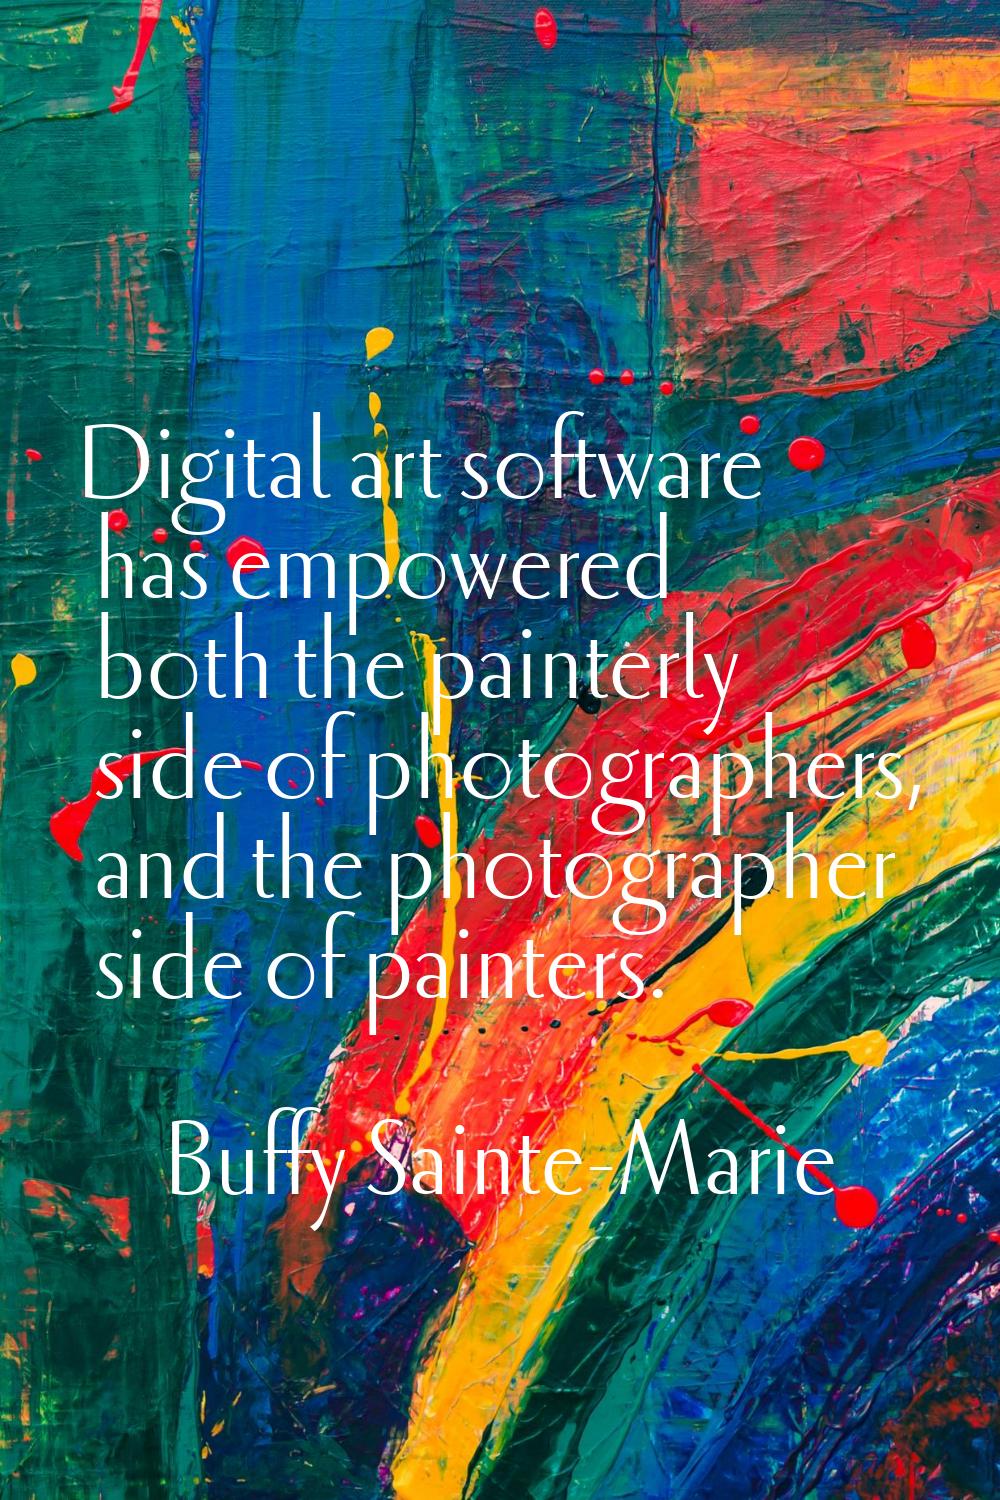 Digital art software has empowered both the painterly side of photographers, and the photographer s